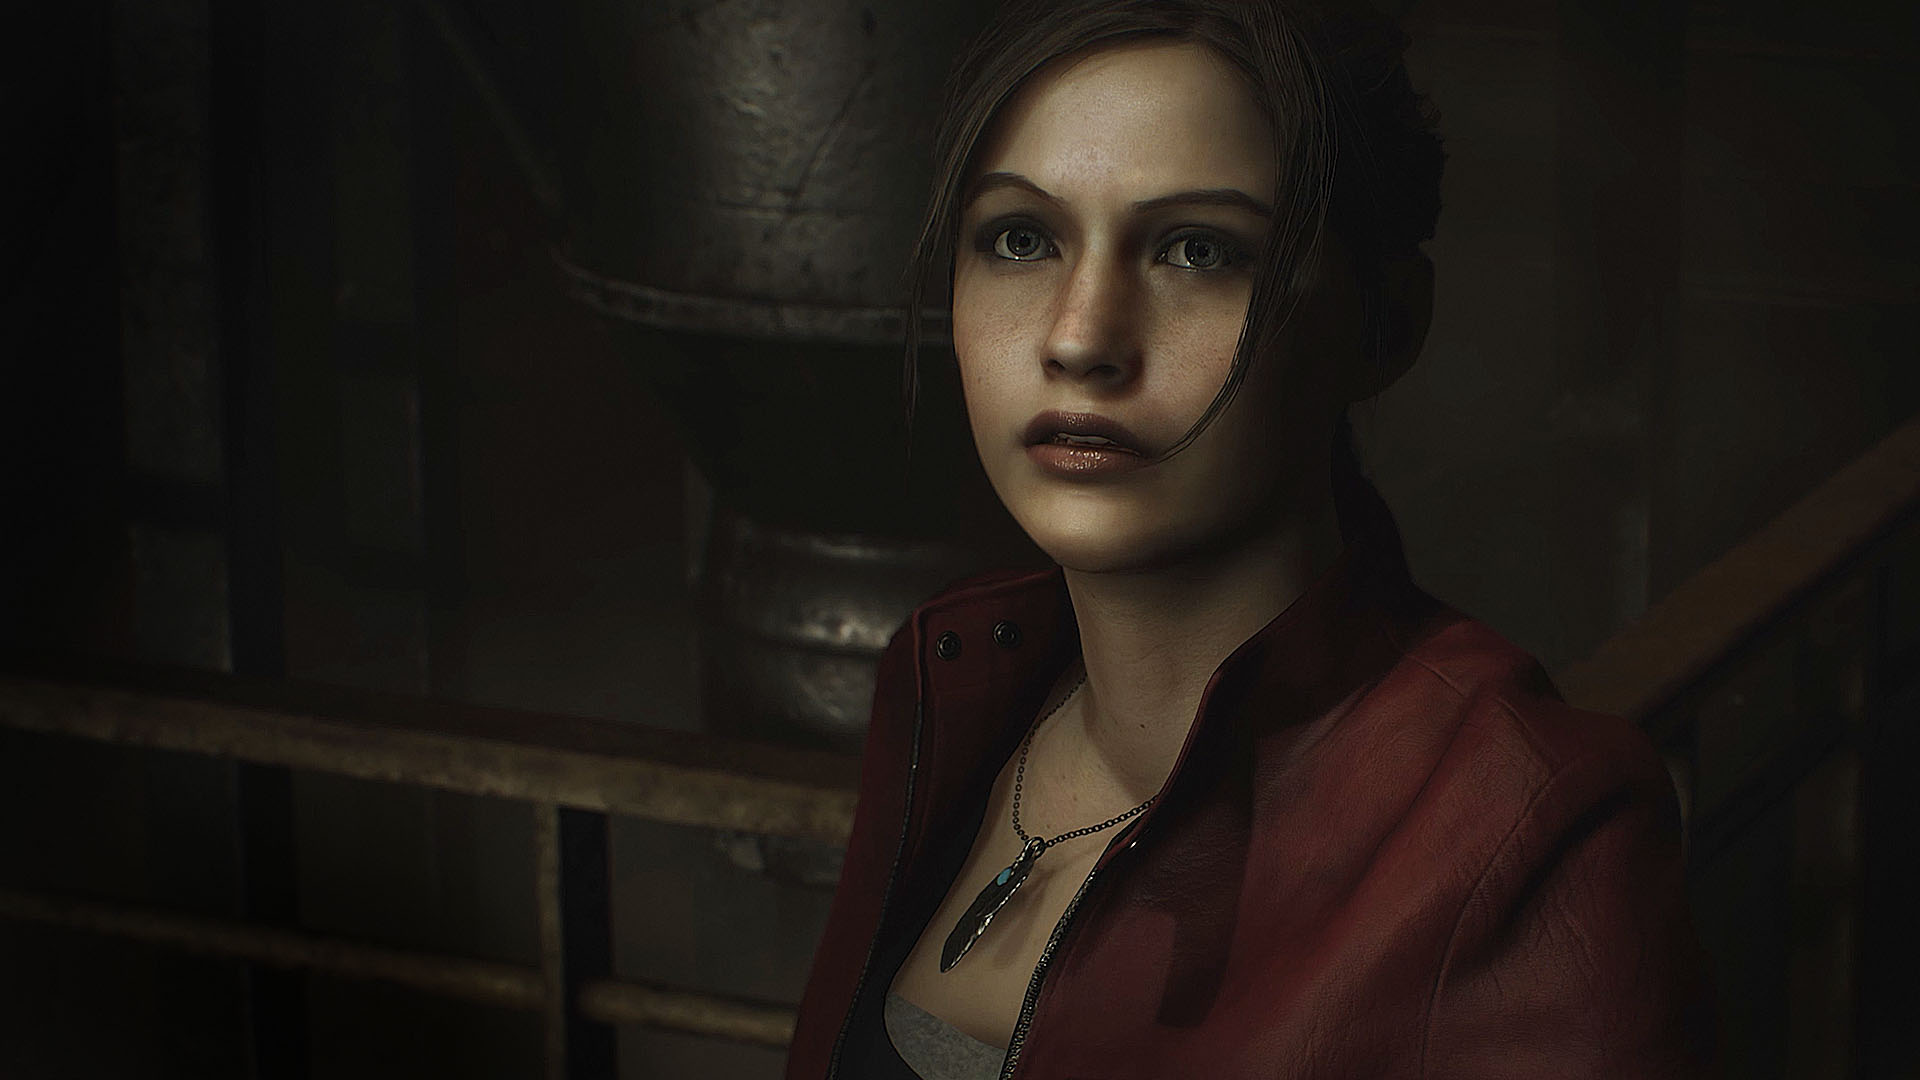 Claire Redfield - Resident Evil CODE Veronica